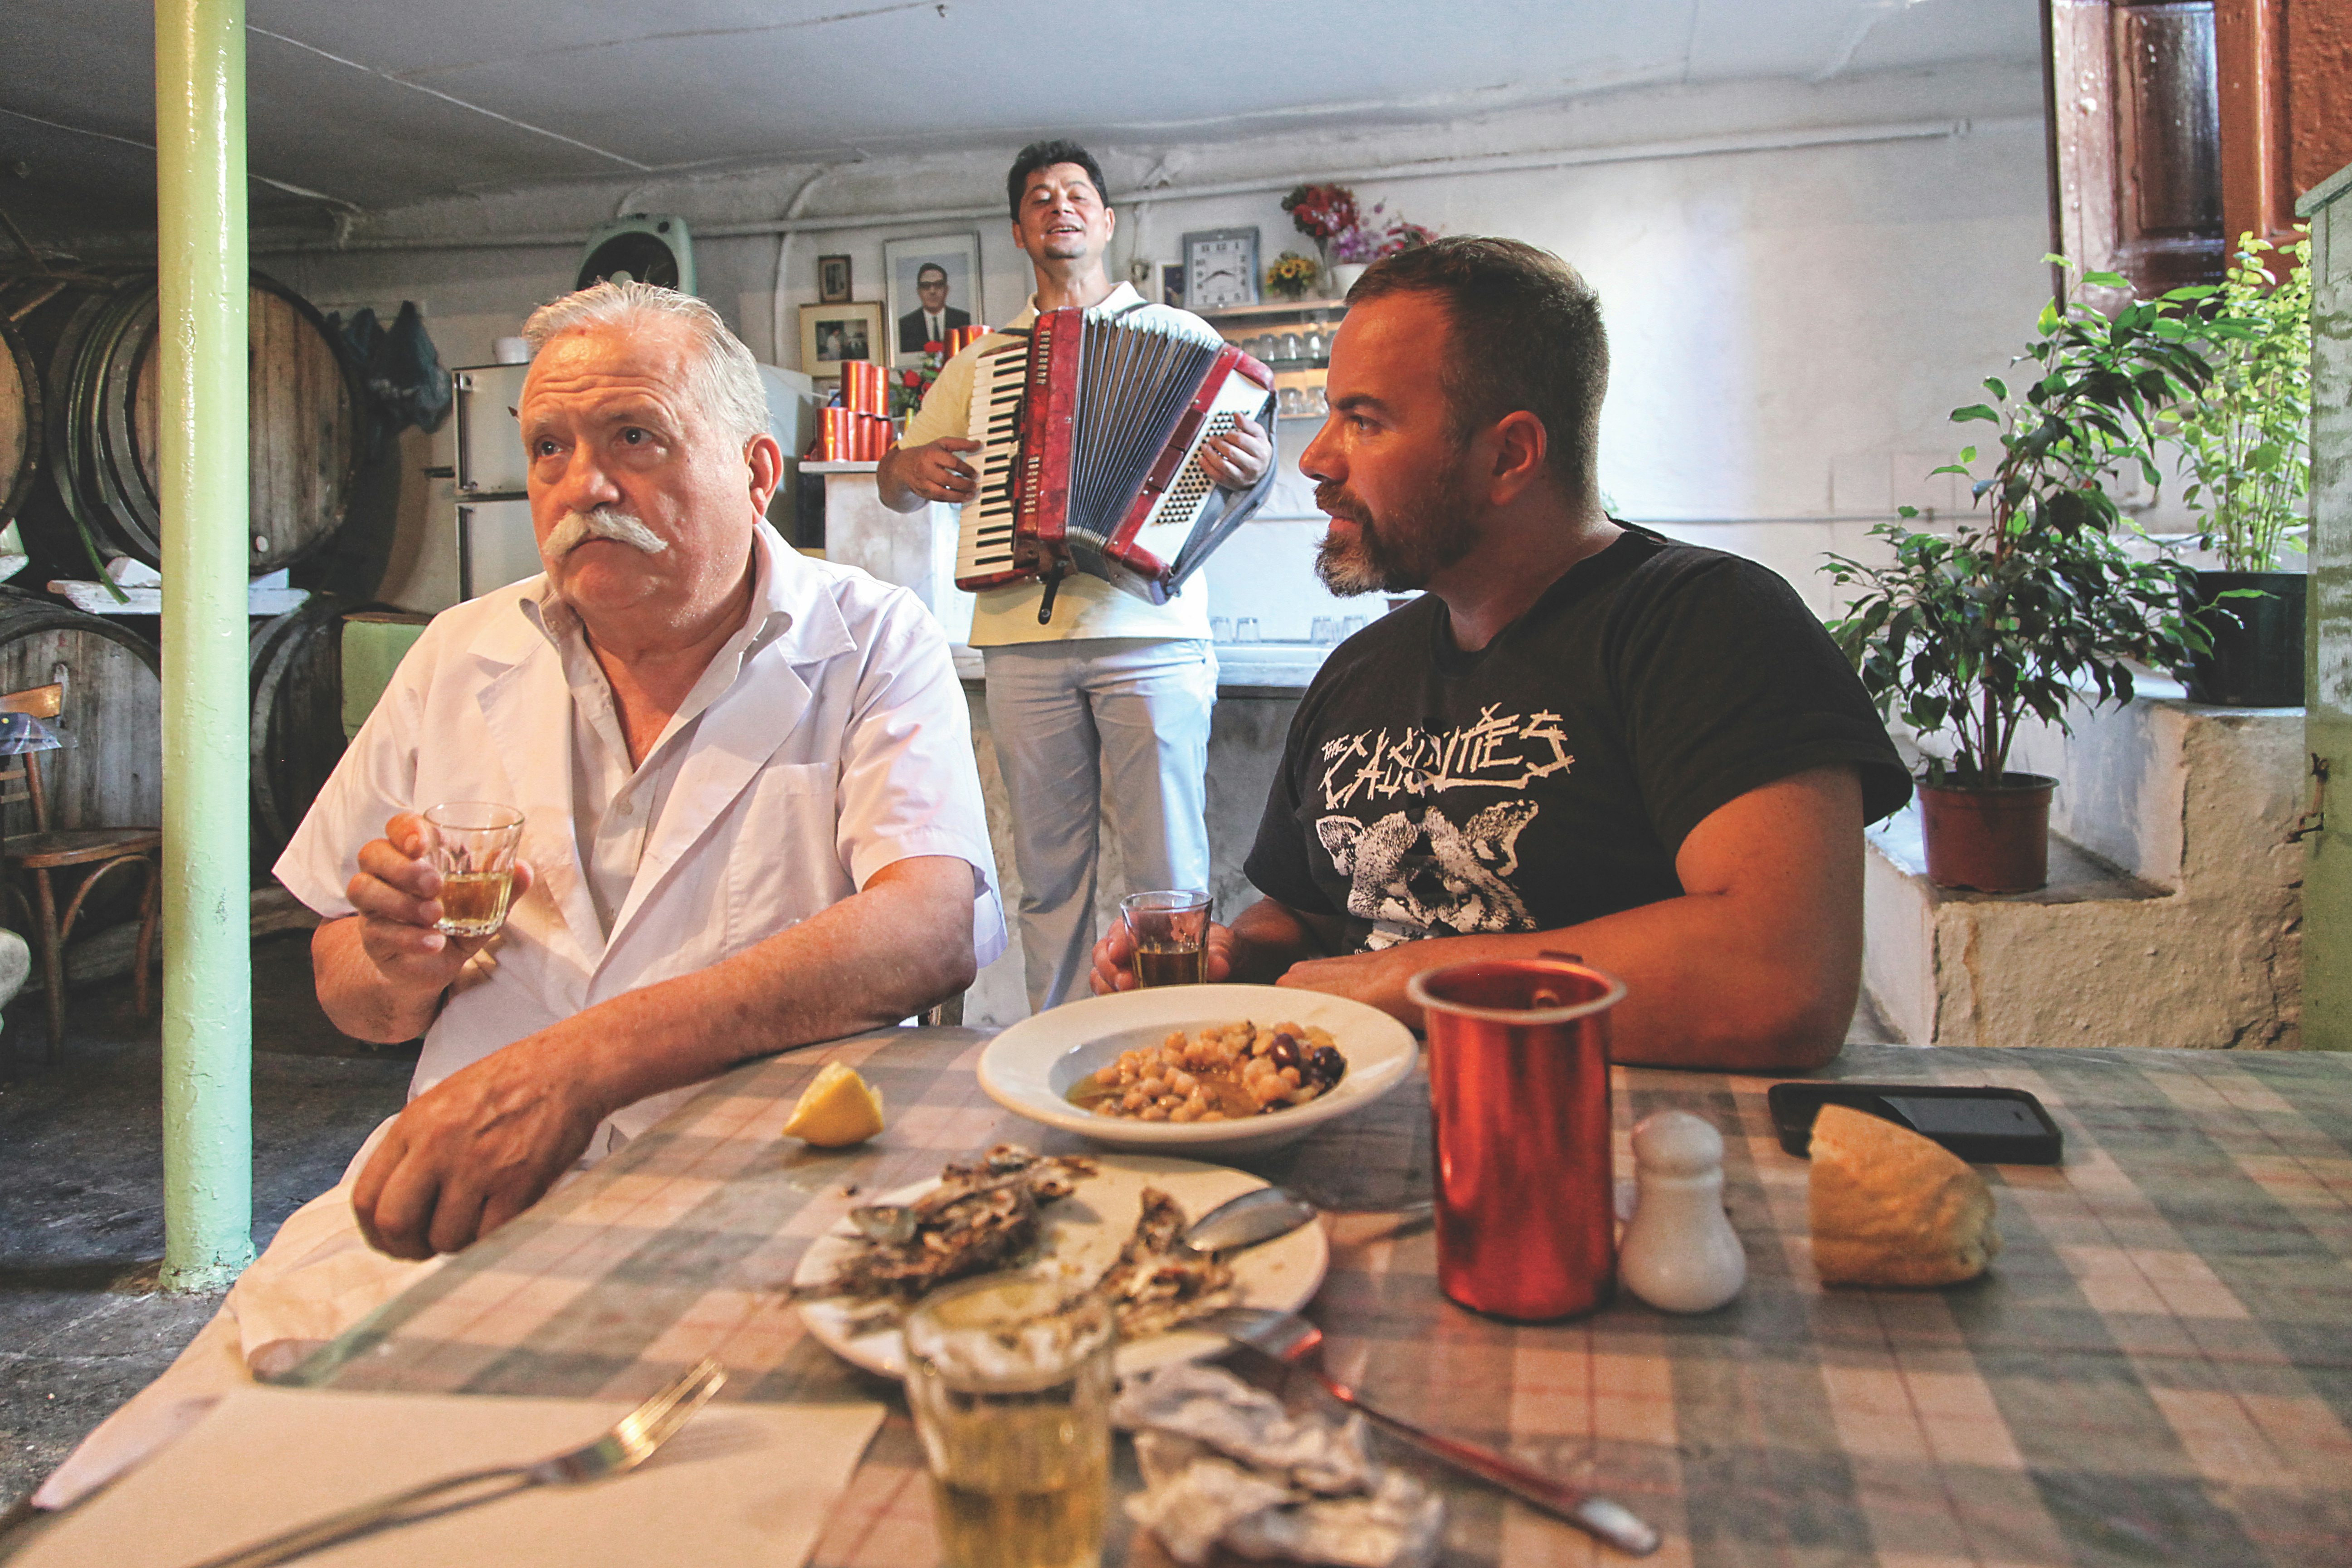 The proprietor of the Diporto taverna in the Monastiraki and Psirri area sits holding a glass of wine. He has a white chefs coat on and a white mustache. To his left sits Kallidis in a black t-shirt with white writing on it. Behind them is an accordion player in white slacks and shirt. On the table are the remains of several dishes and a hunk of bread